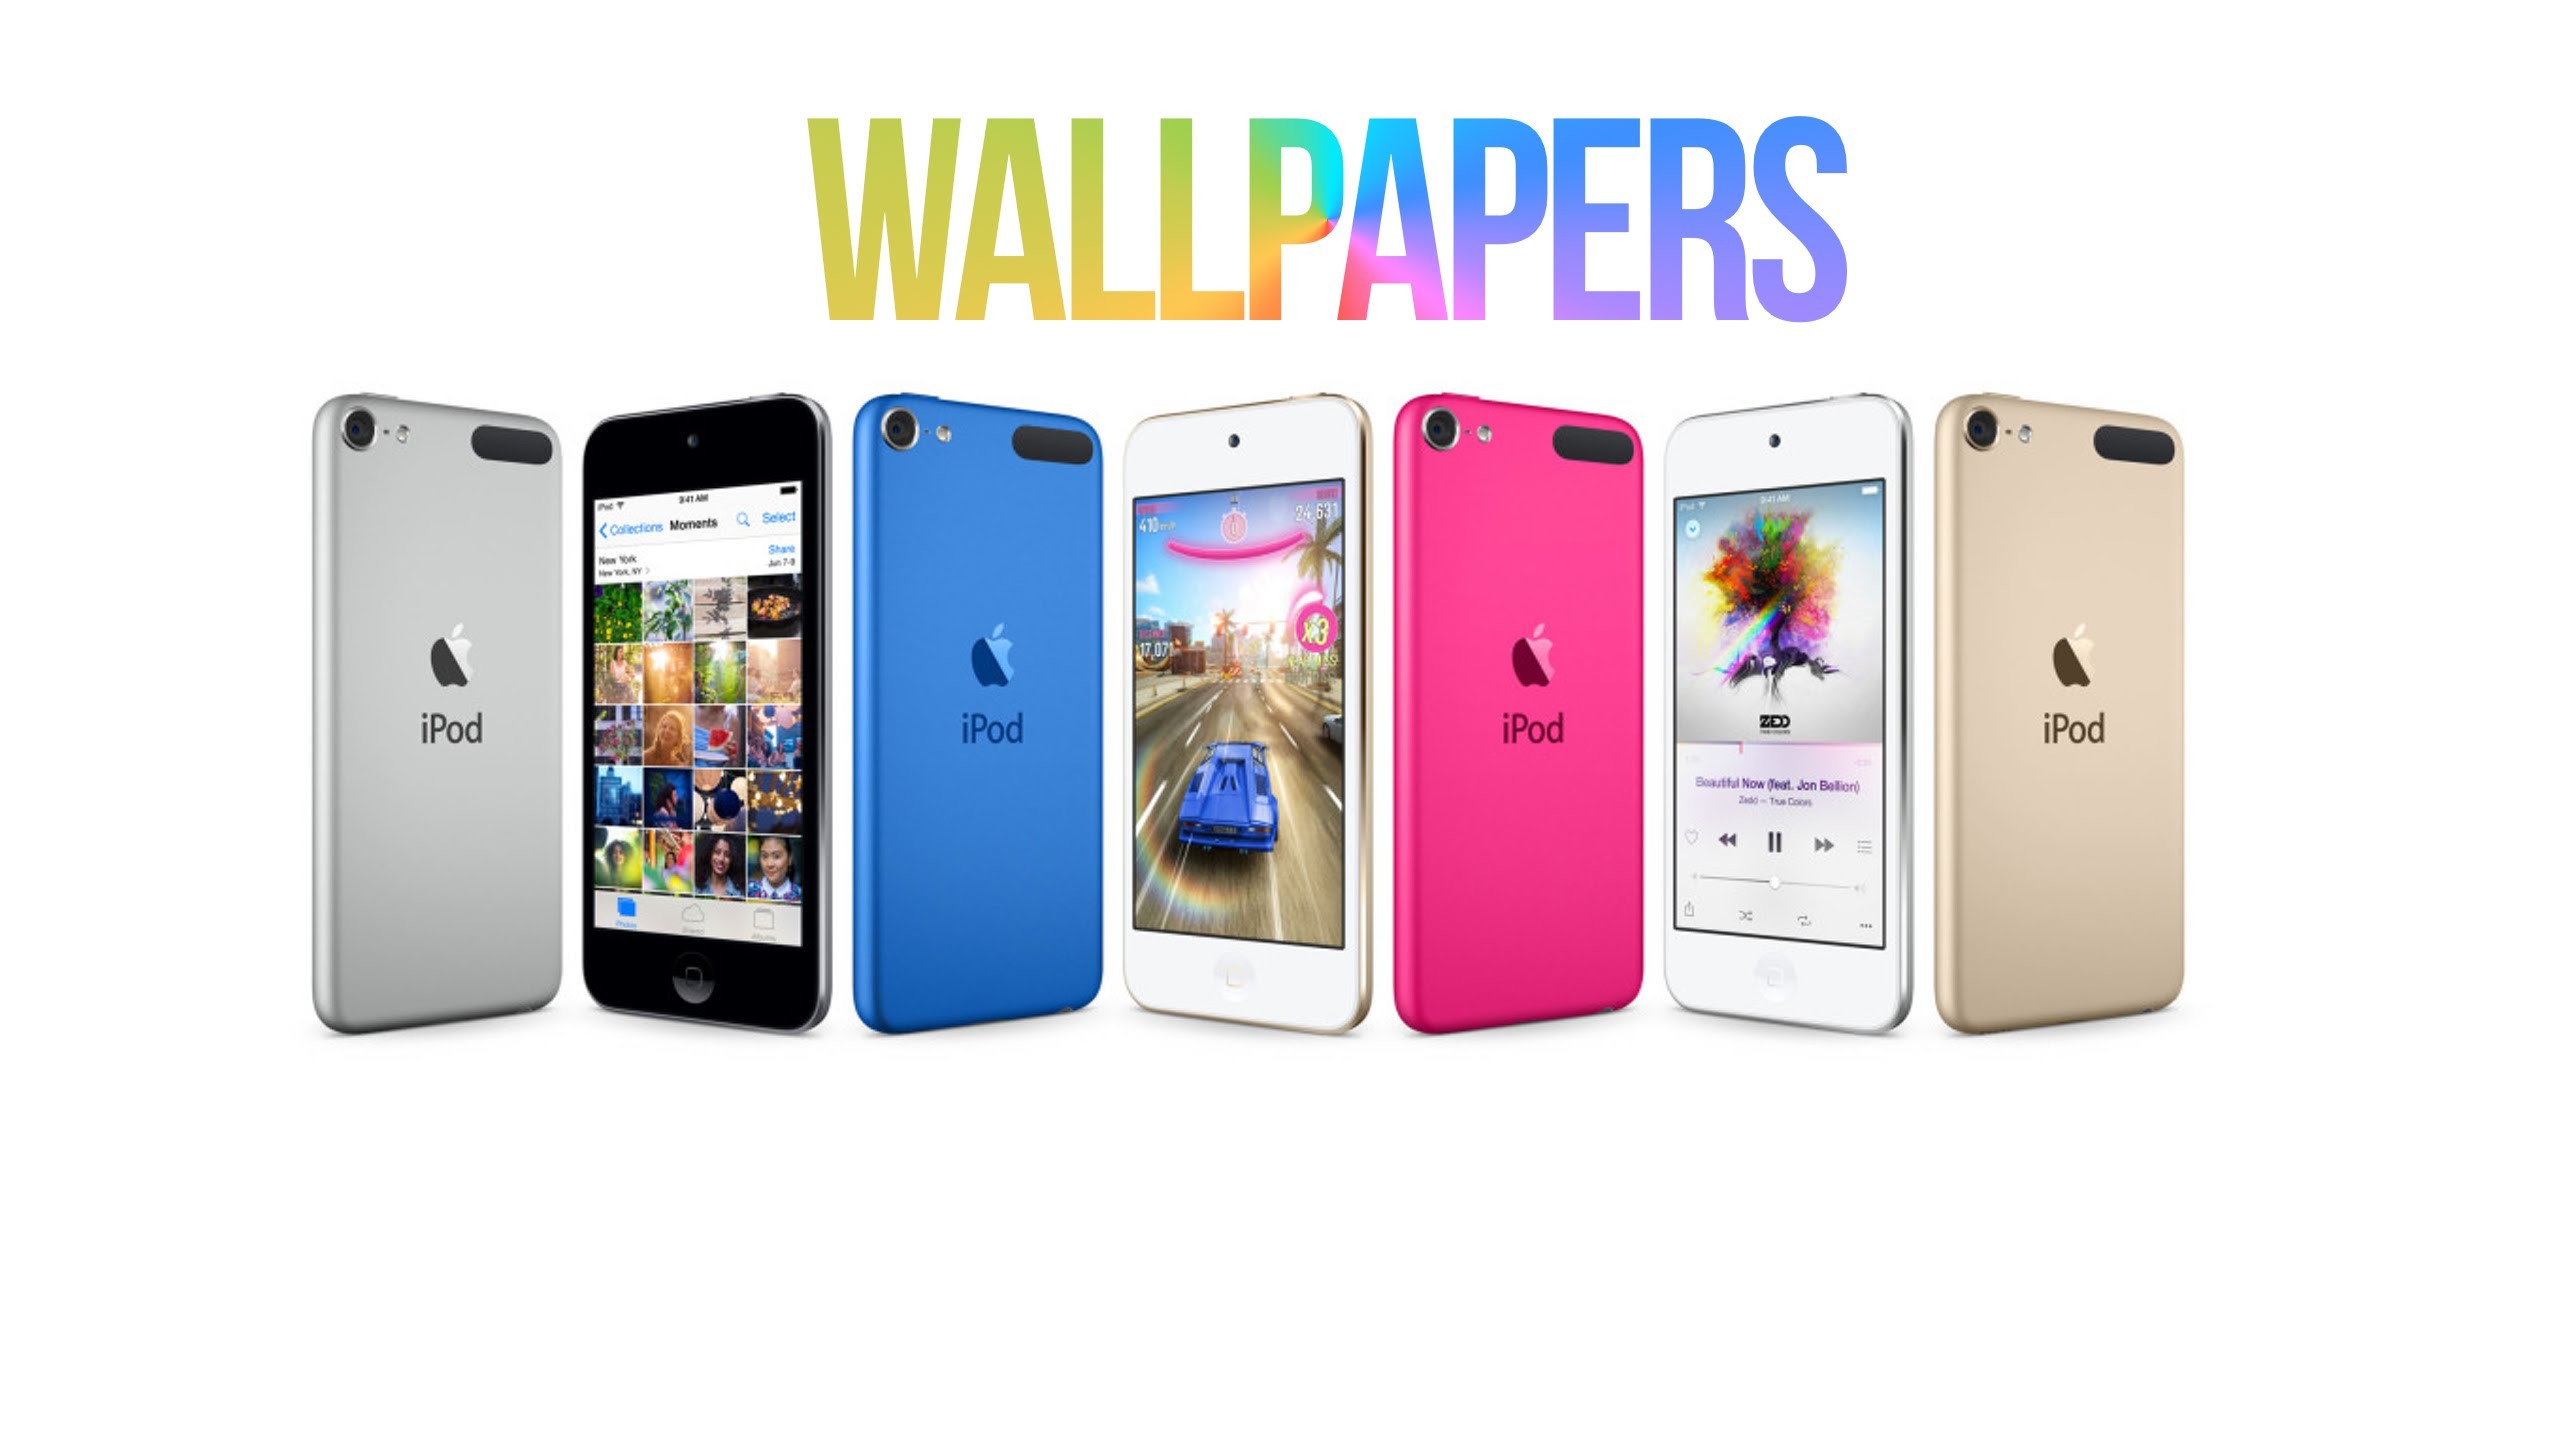 2560x1440 NEW iPod Touch 6th Generation Gold, Pink, Blue & Space Gray - Wallpapers +  FREE DOWNLOAD - YouTube